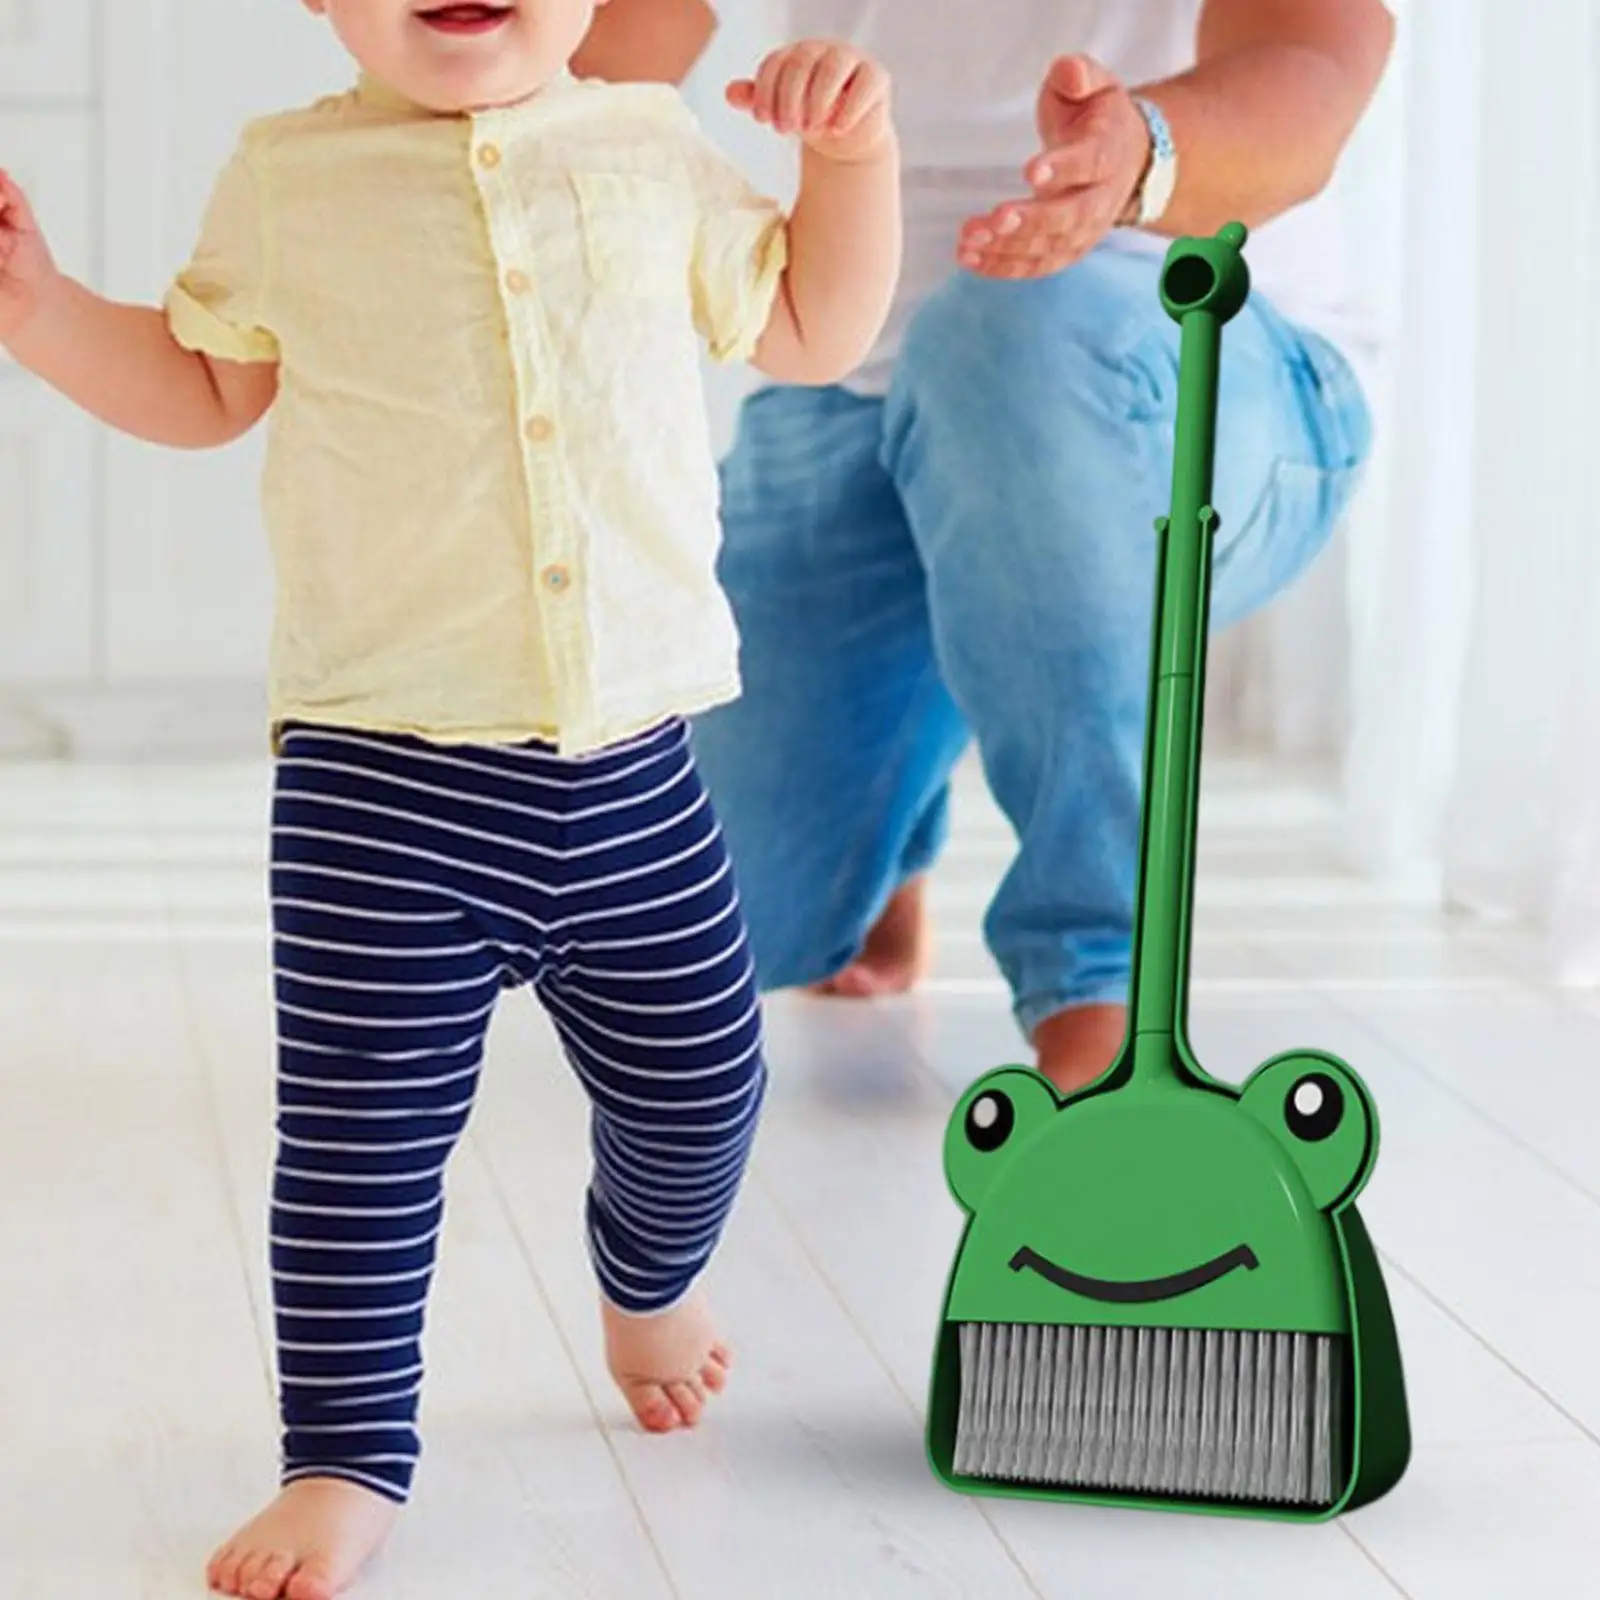 Mini Broom with Dustpan Holiday Gifts Educational Lovely Frog Theme Housekeeping Play Set for Kindergarten Preschool Boys Girls